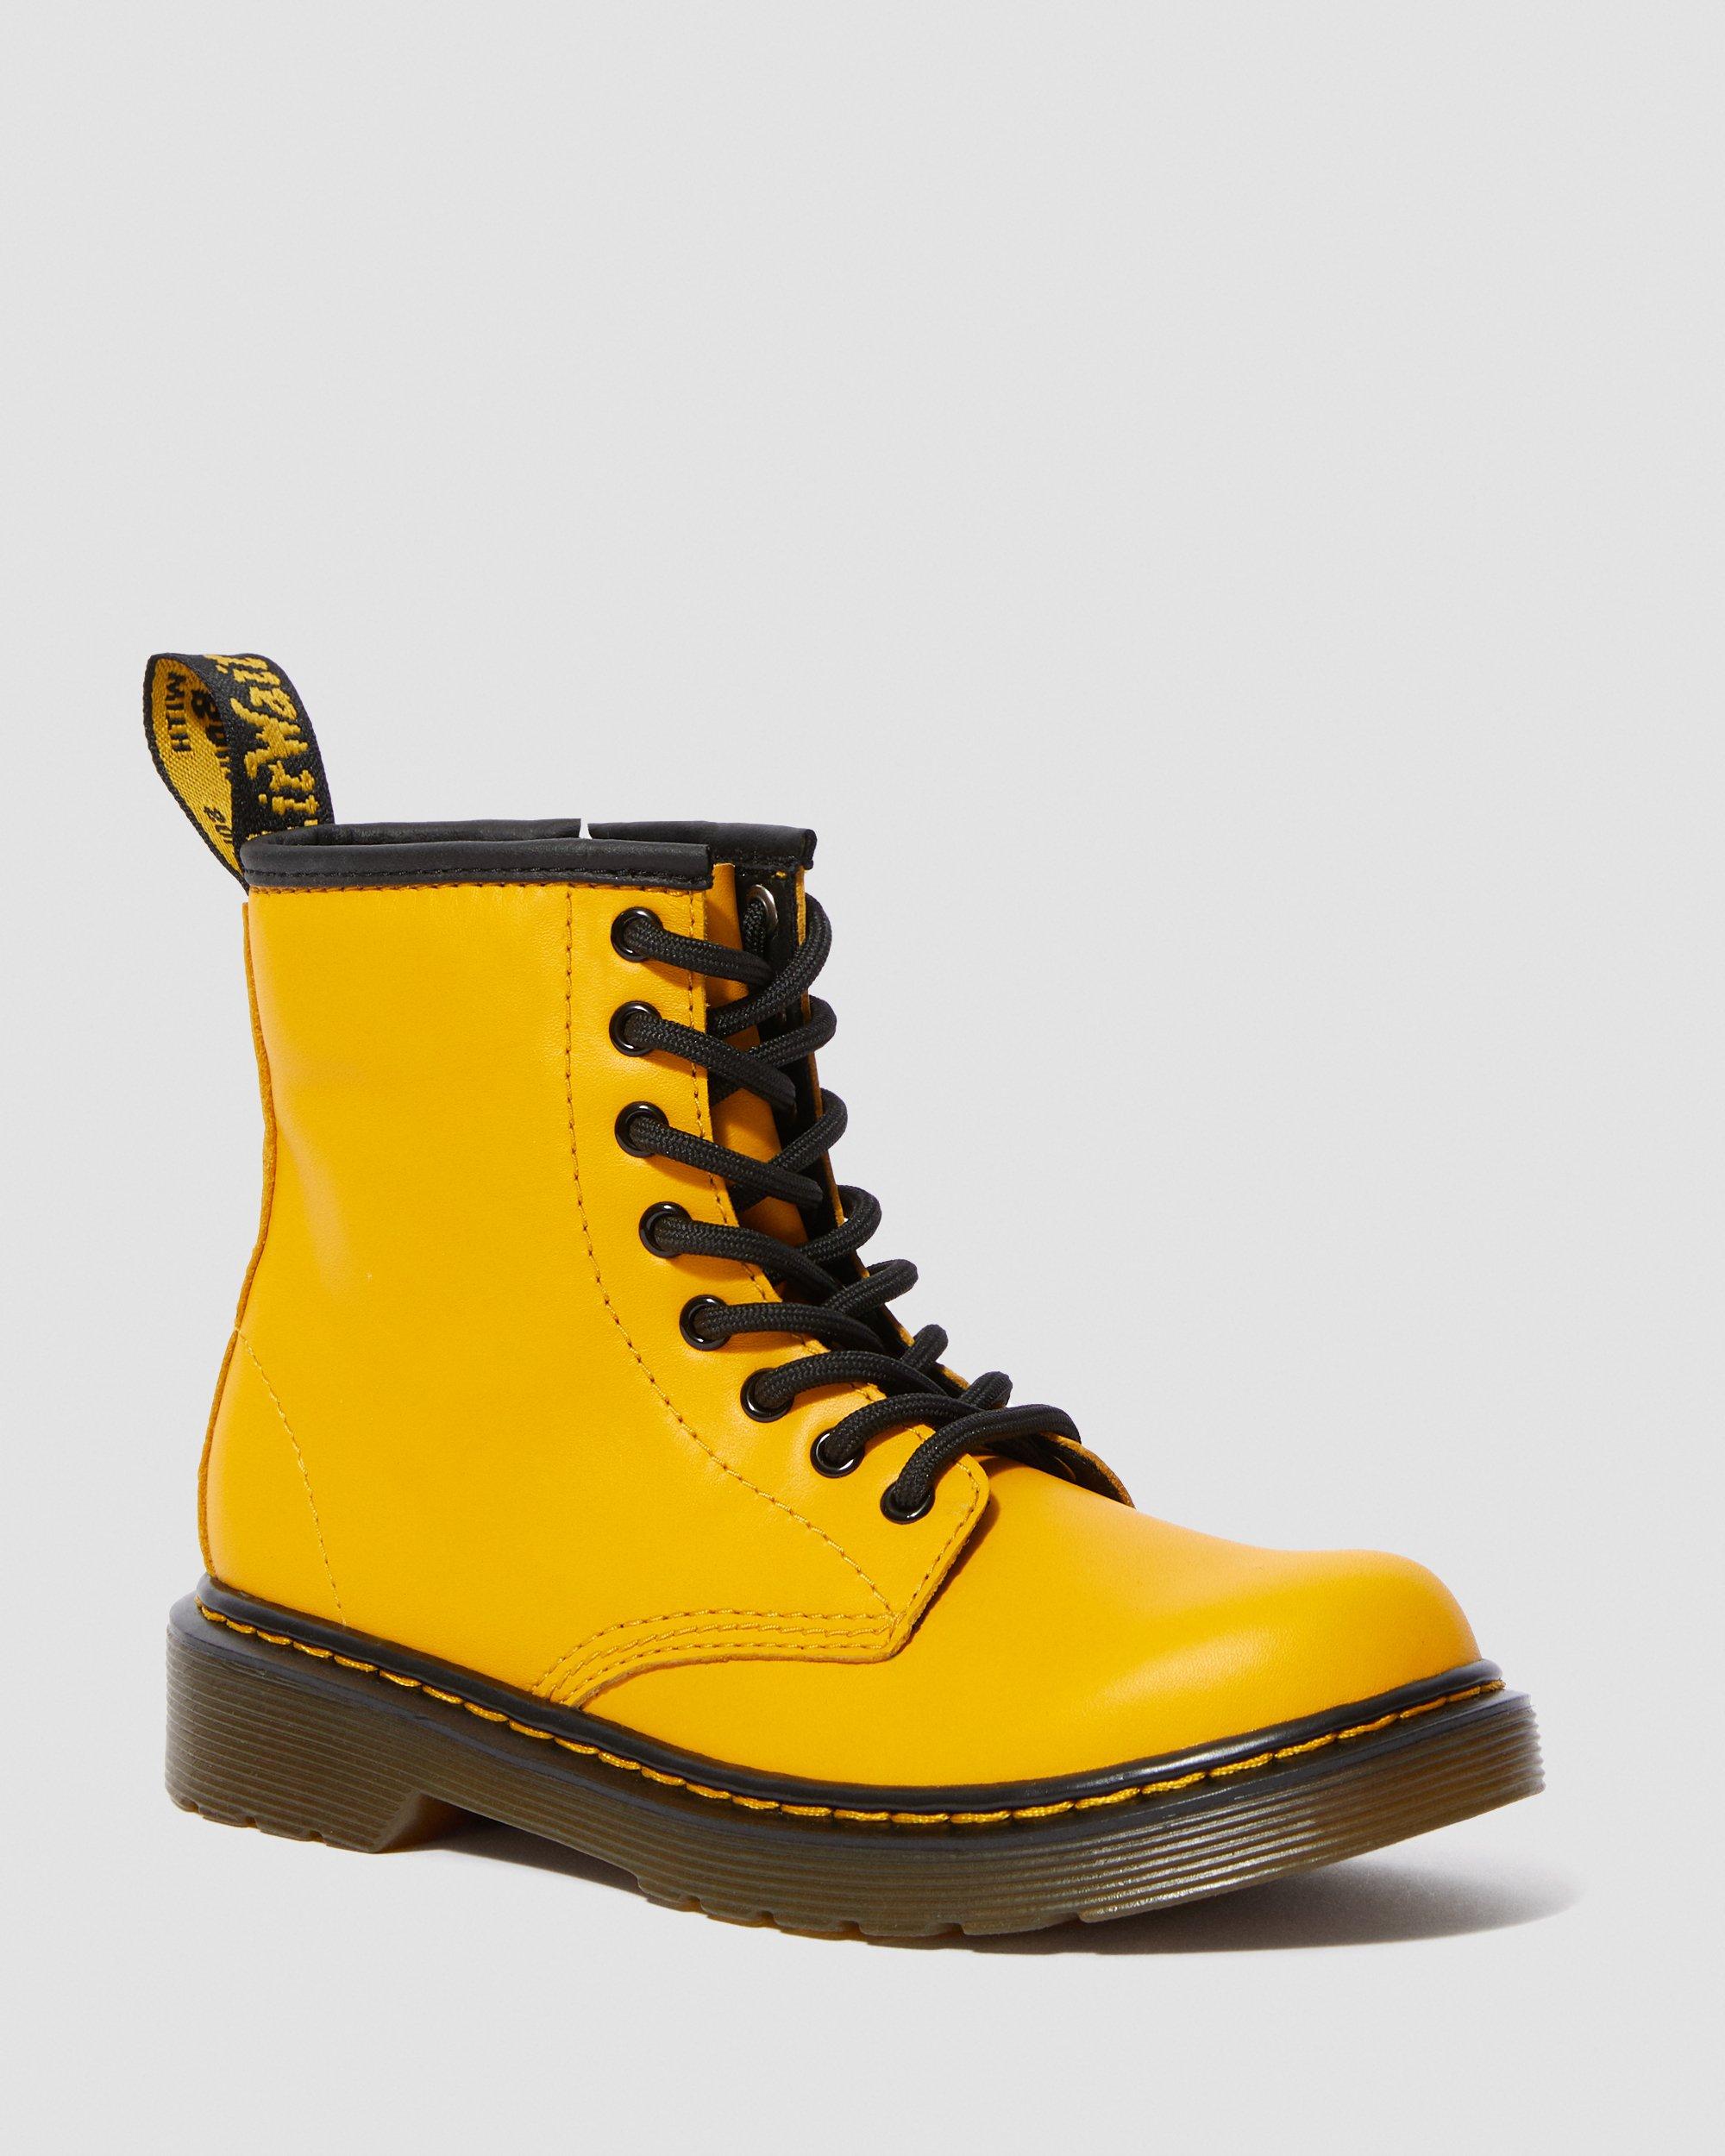 Junior 1460 Leather Lace Up Boots, Yellow | Dr. Martens